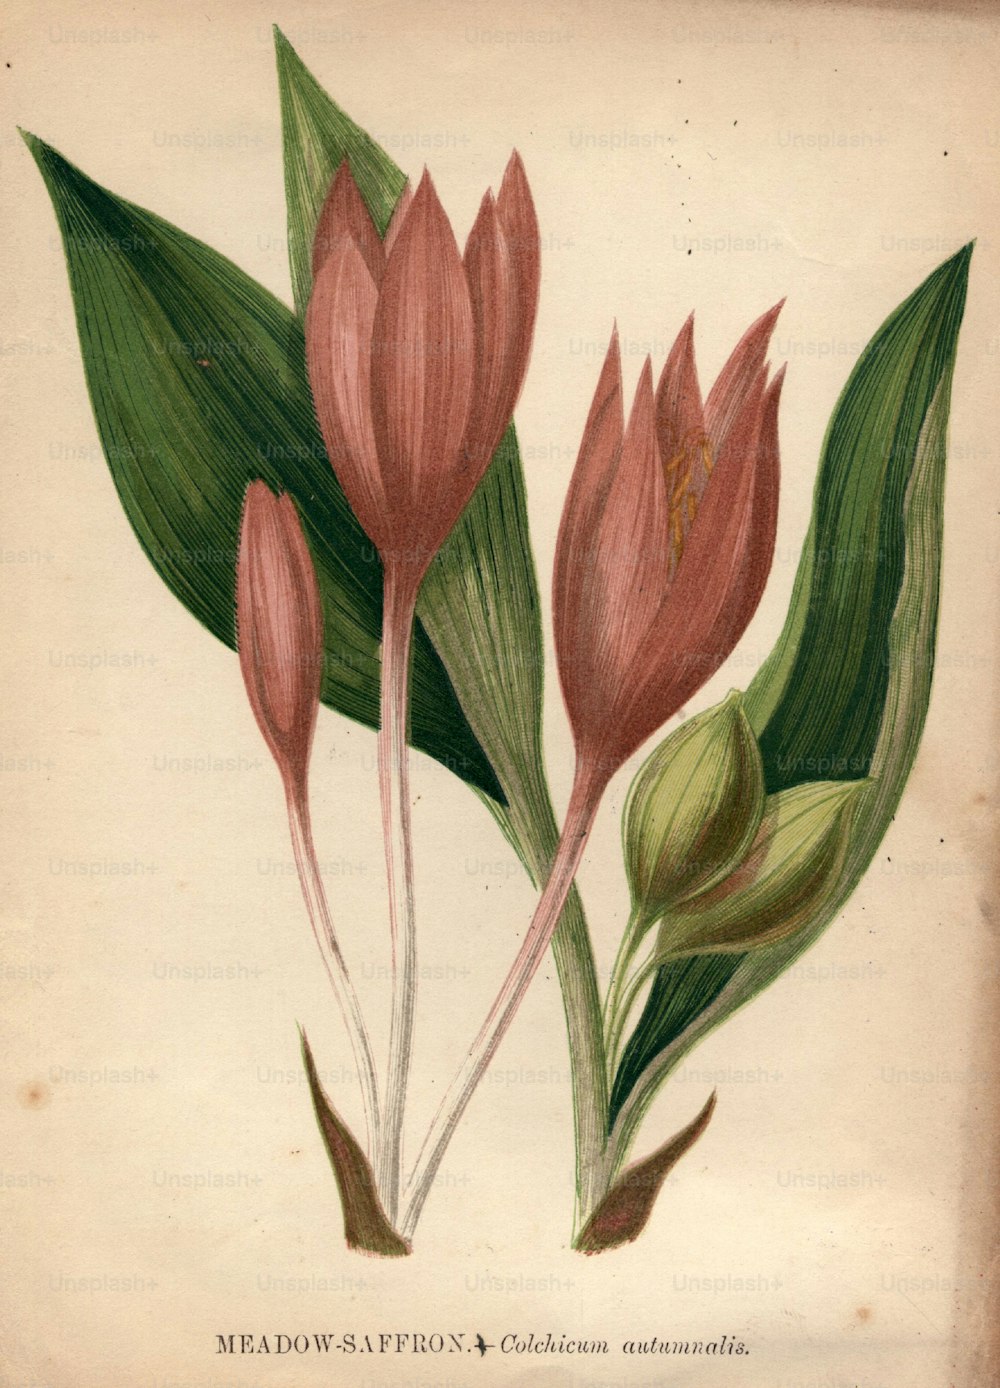 circa 1800:  The meadow saffron, or colchicum autumnalis.  (Photo by Hulton Archive/Getty Images)